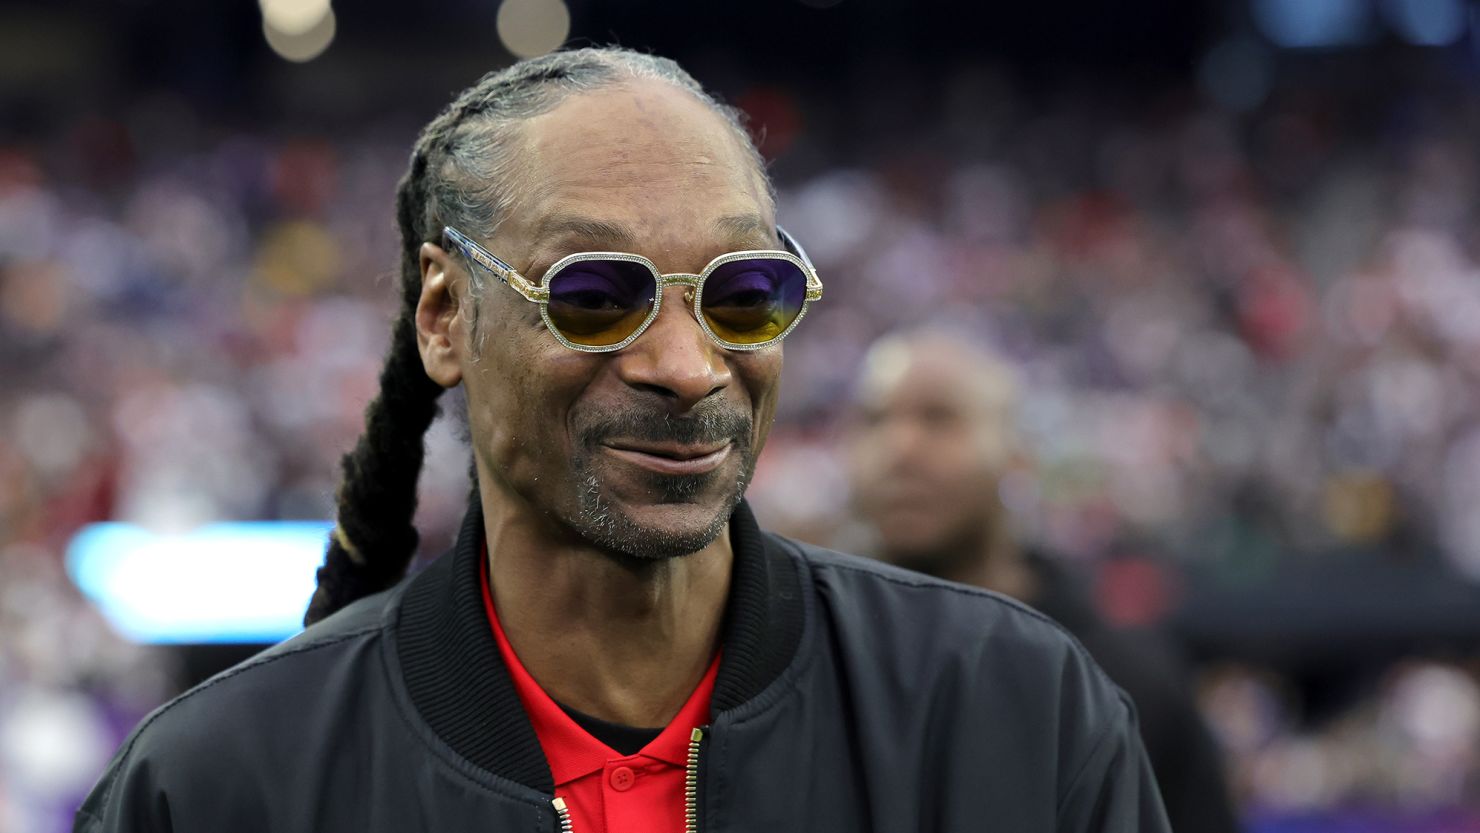 Snoop Dogg Rejects $100 Million OnlyFans Offer, Wife Sets Boundaries